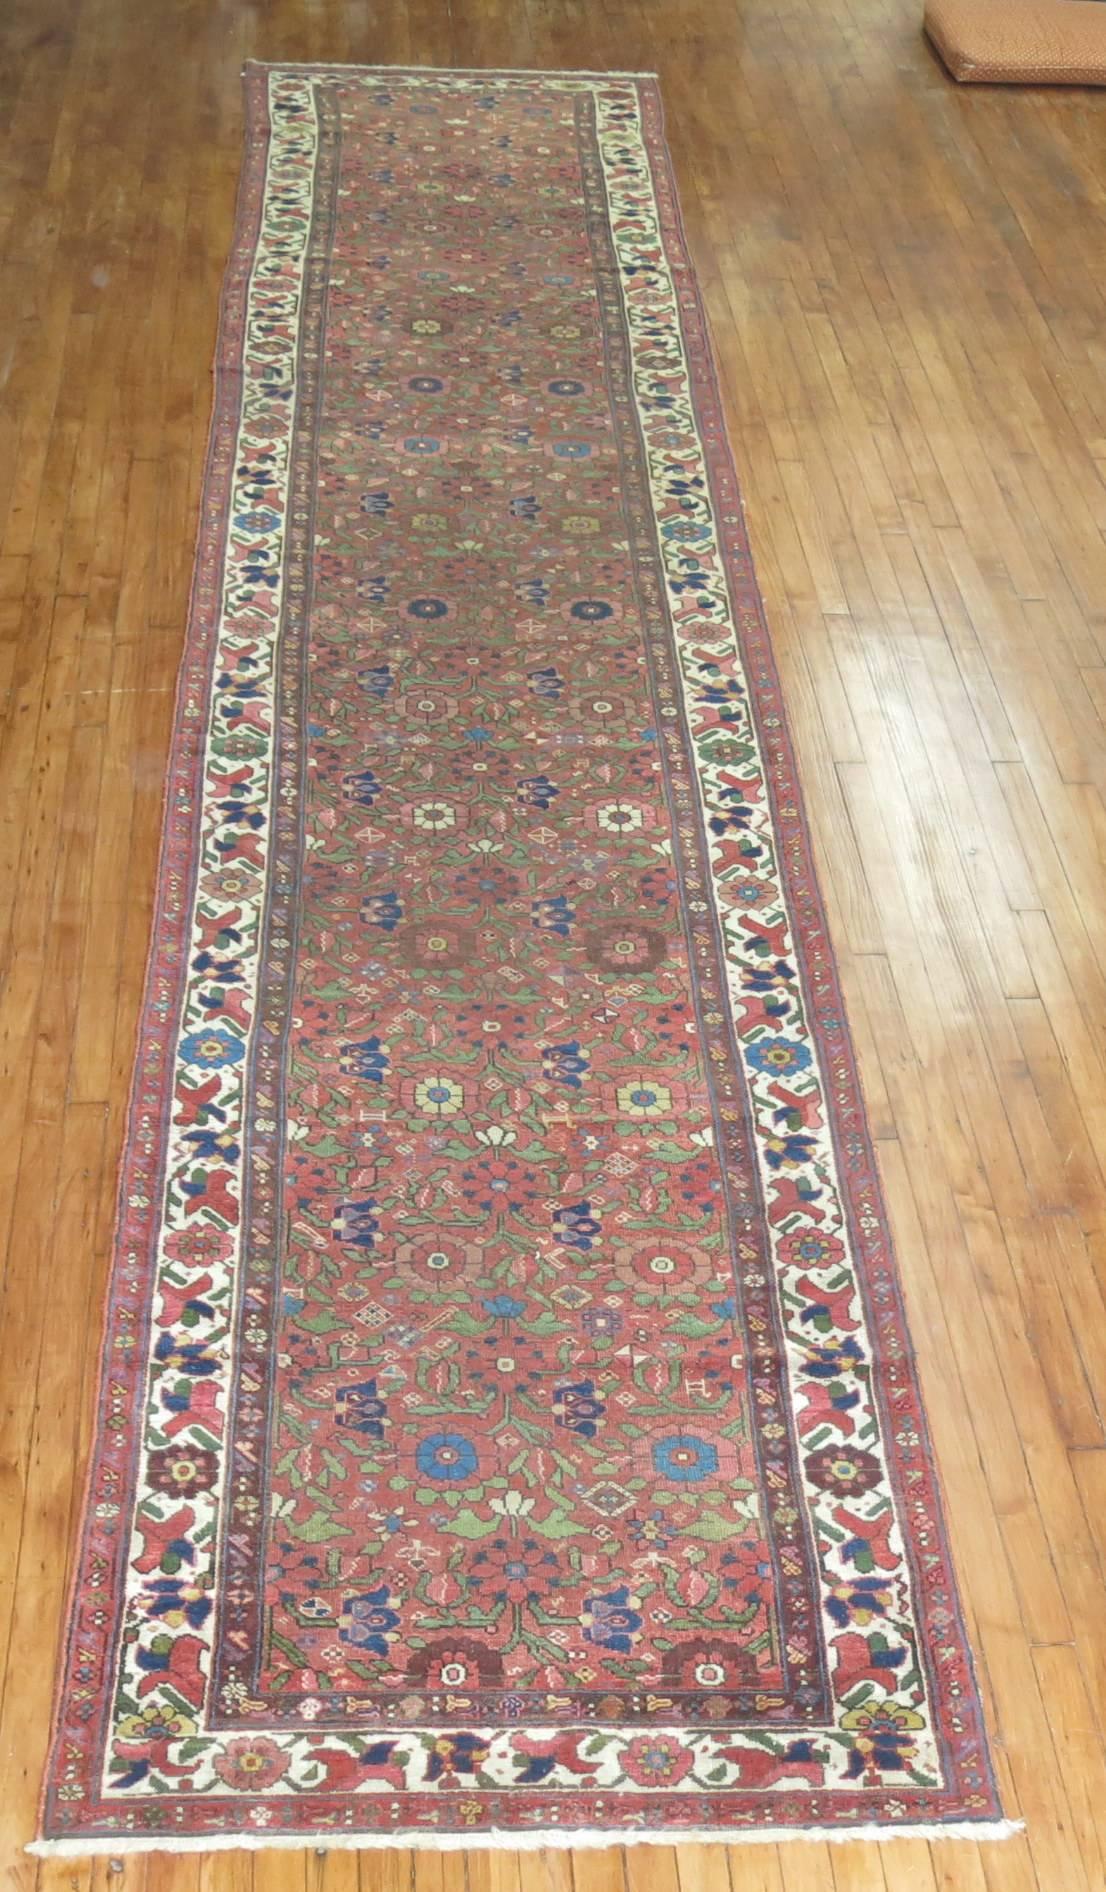 A runner from an early 20th century Persian Malayer Runner. Brick ground with an array of colorful dominant accents in navy, yellow, and celery green

Measures: 3'7